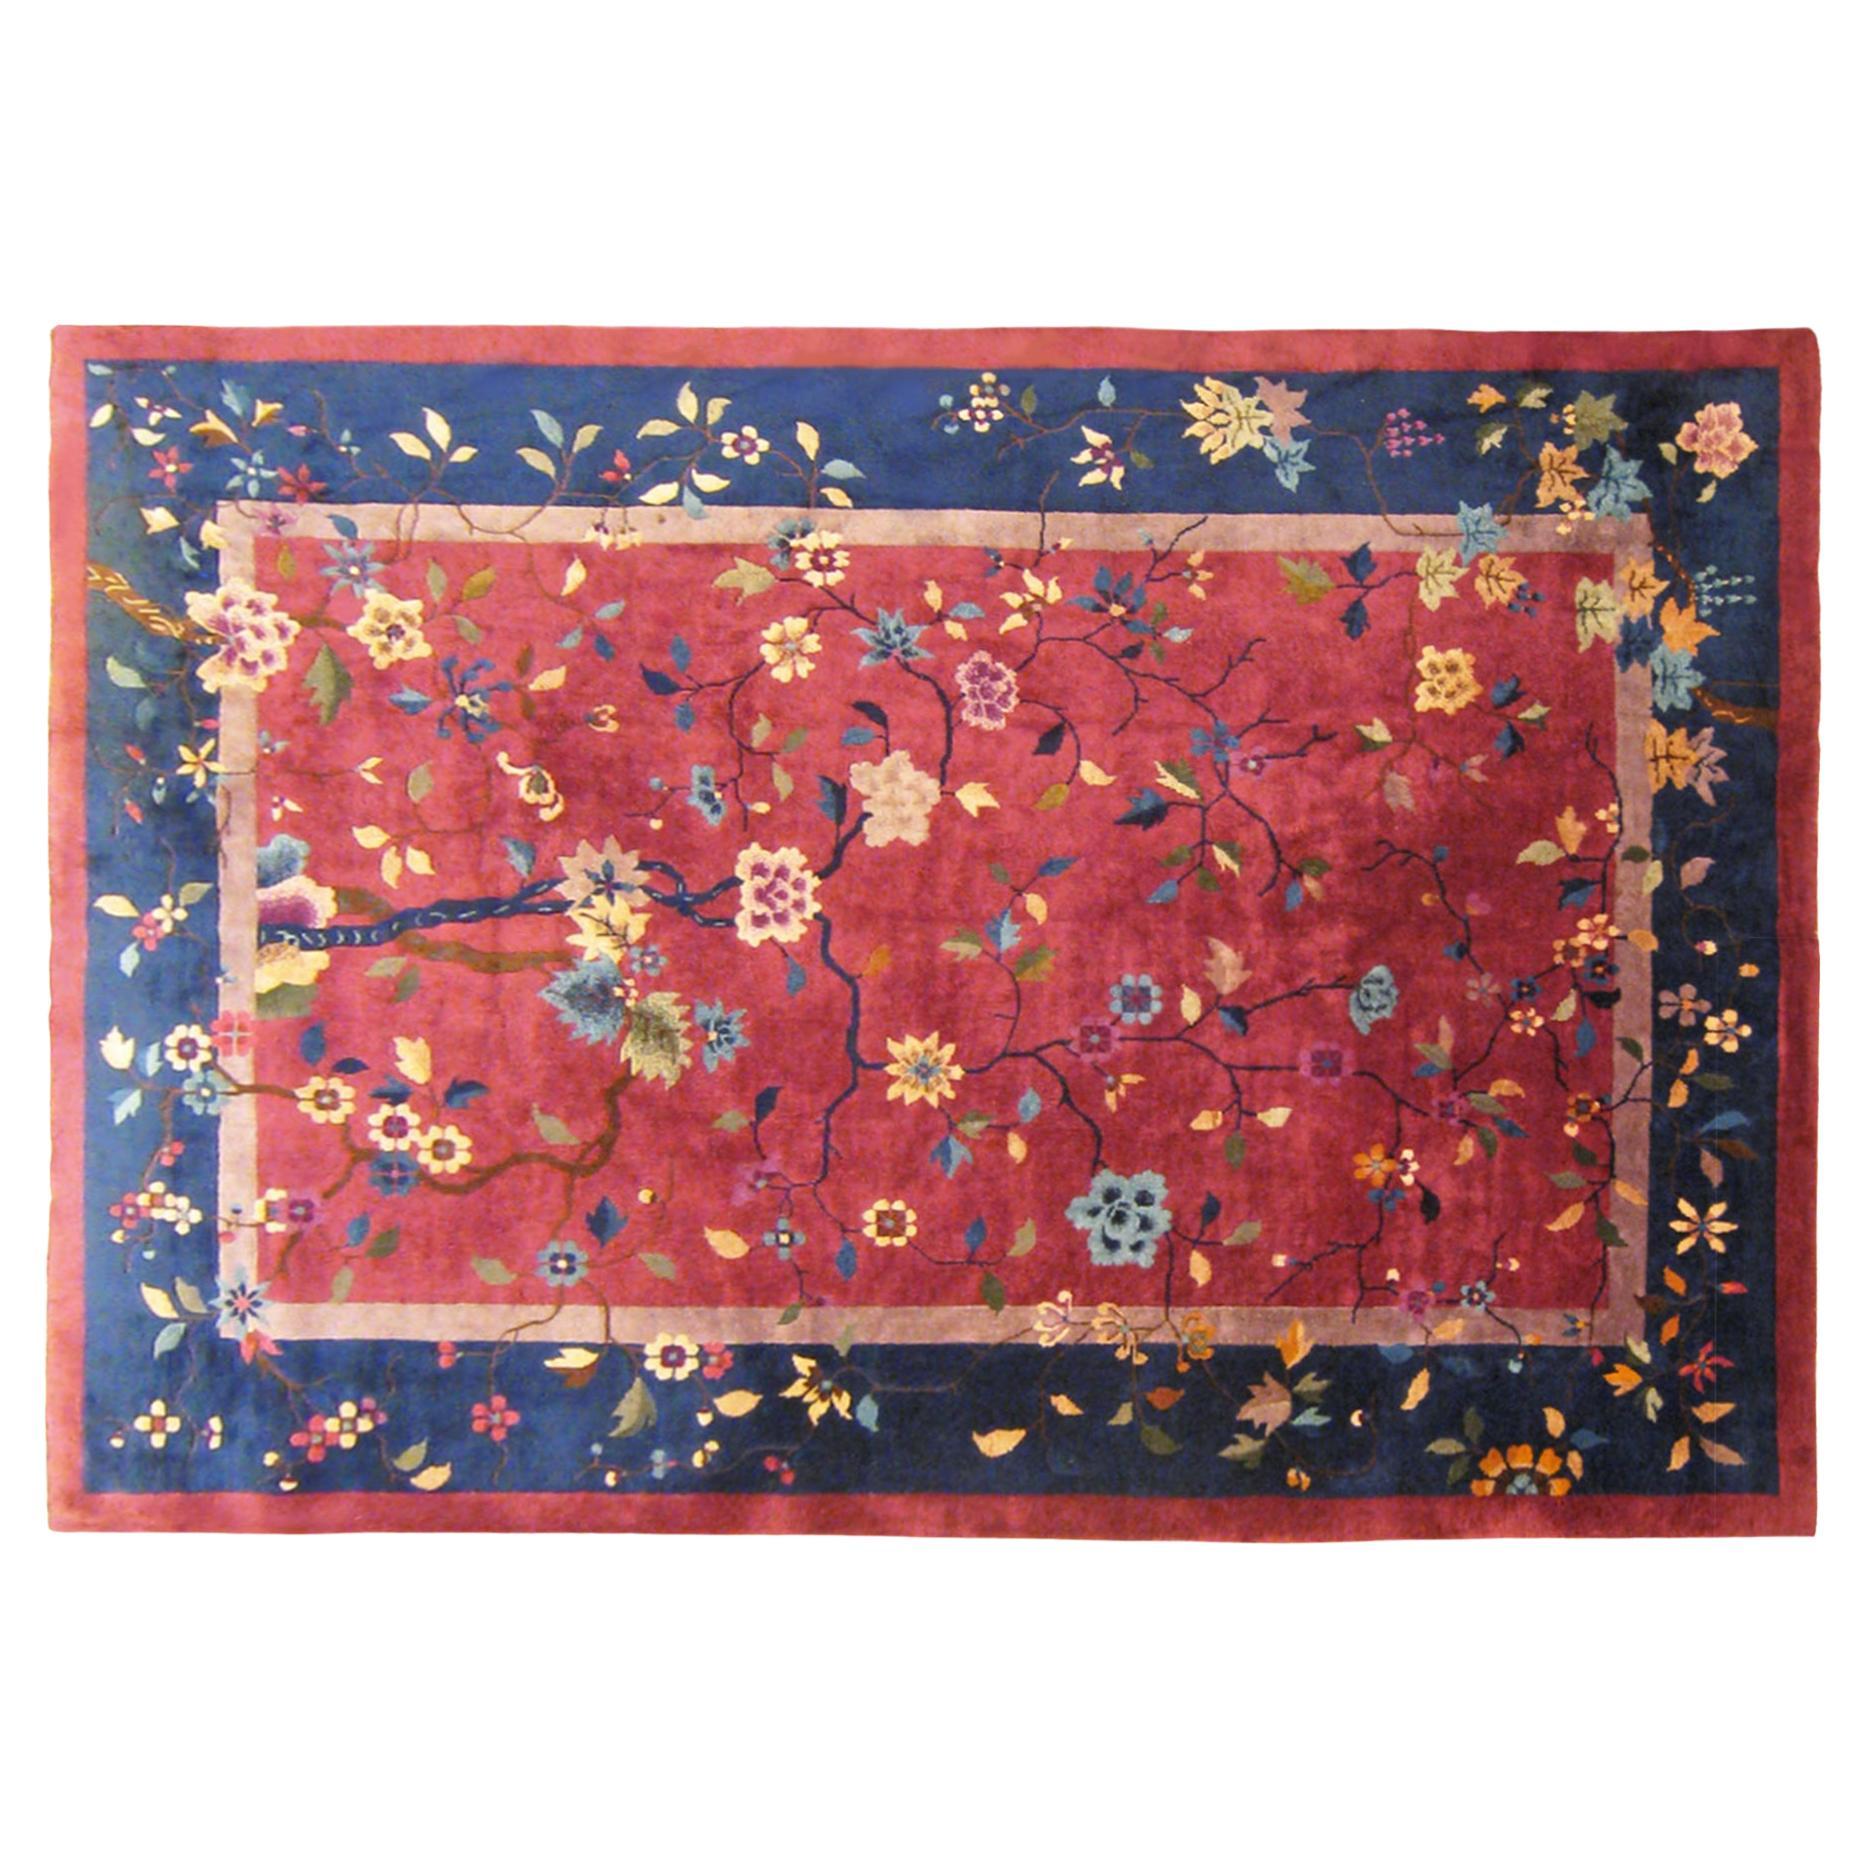 Antique Chinese Oriental Rug, in Room Size, with Flowers and Red and Blue Tones